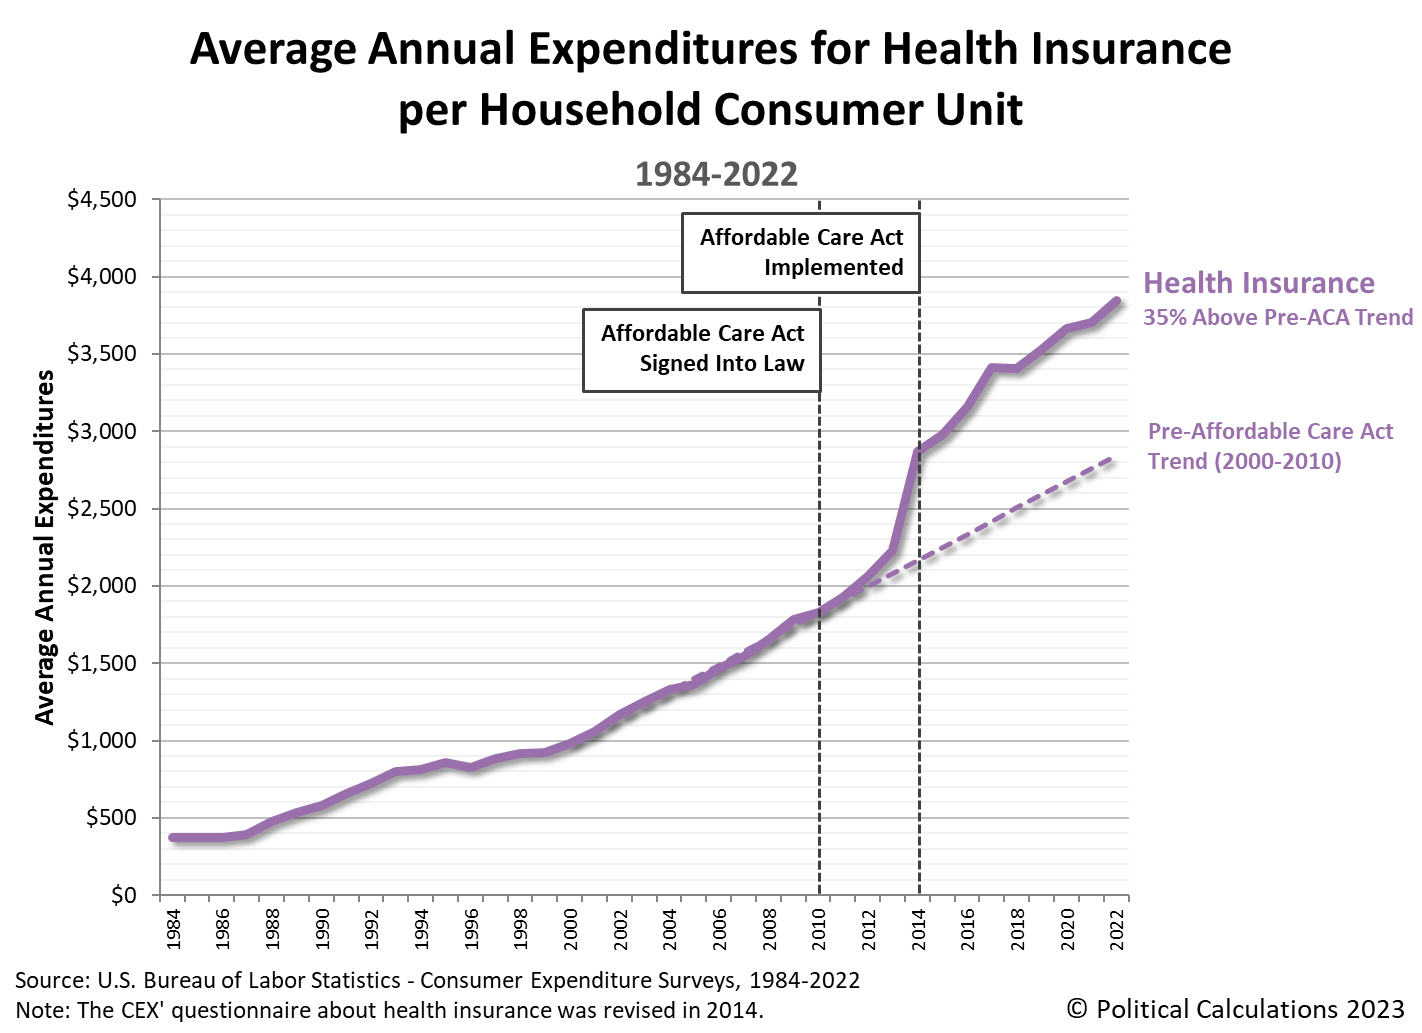 Average Annual Expenditures for Health Insurance per Household Consumer Unit, 1984-2022